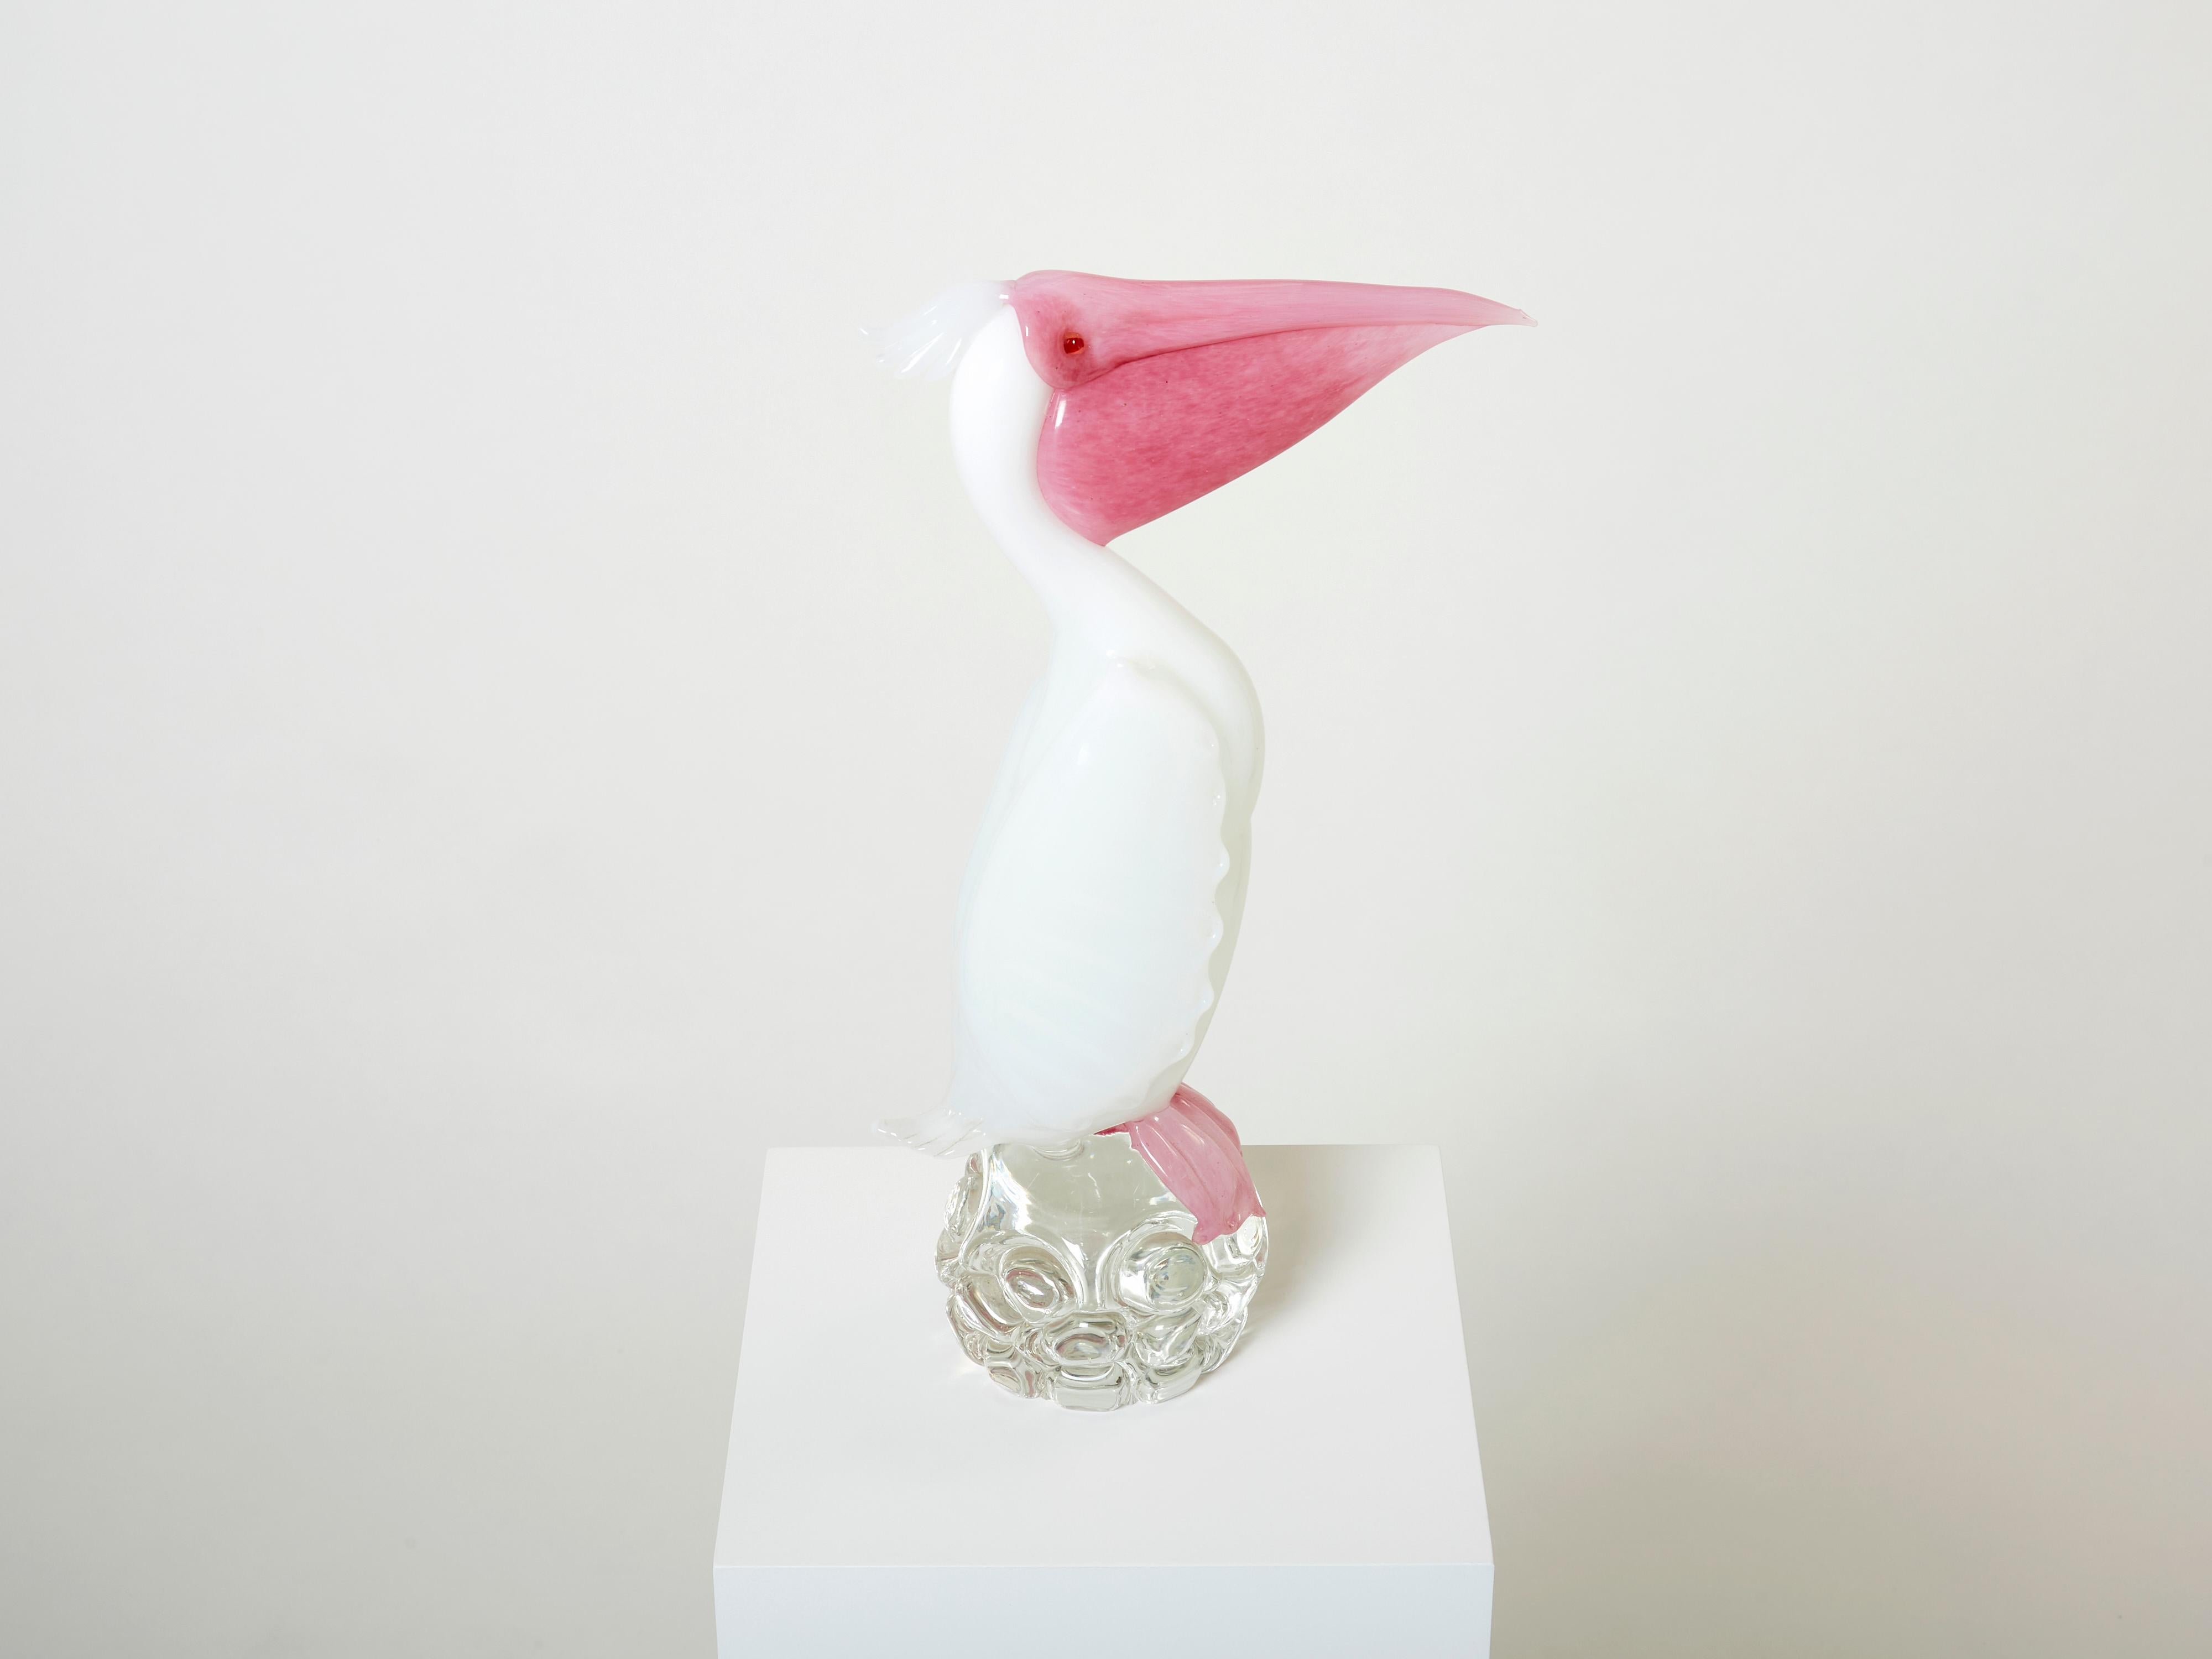 Beautiful Murano glass Pelican sculpture, on a crystal pedestal, made by Pino Signoretto in Italy in the late 1970s. This piece was created using Murano glass crystal and lattimo technique, with an amazing attention to details despite the